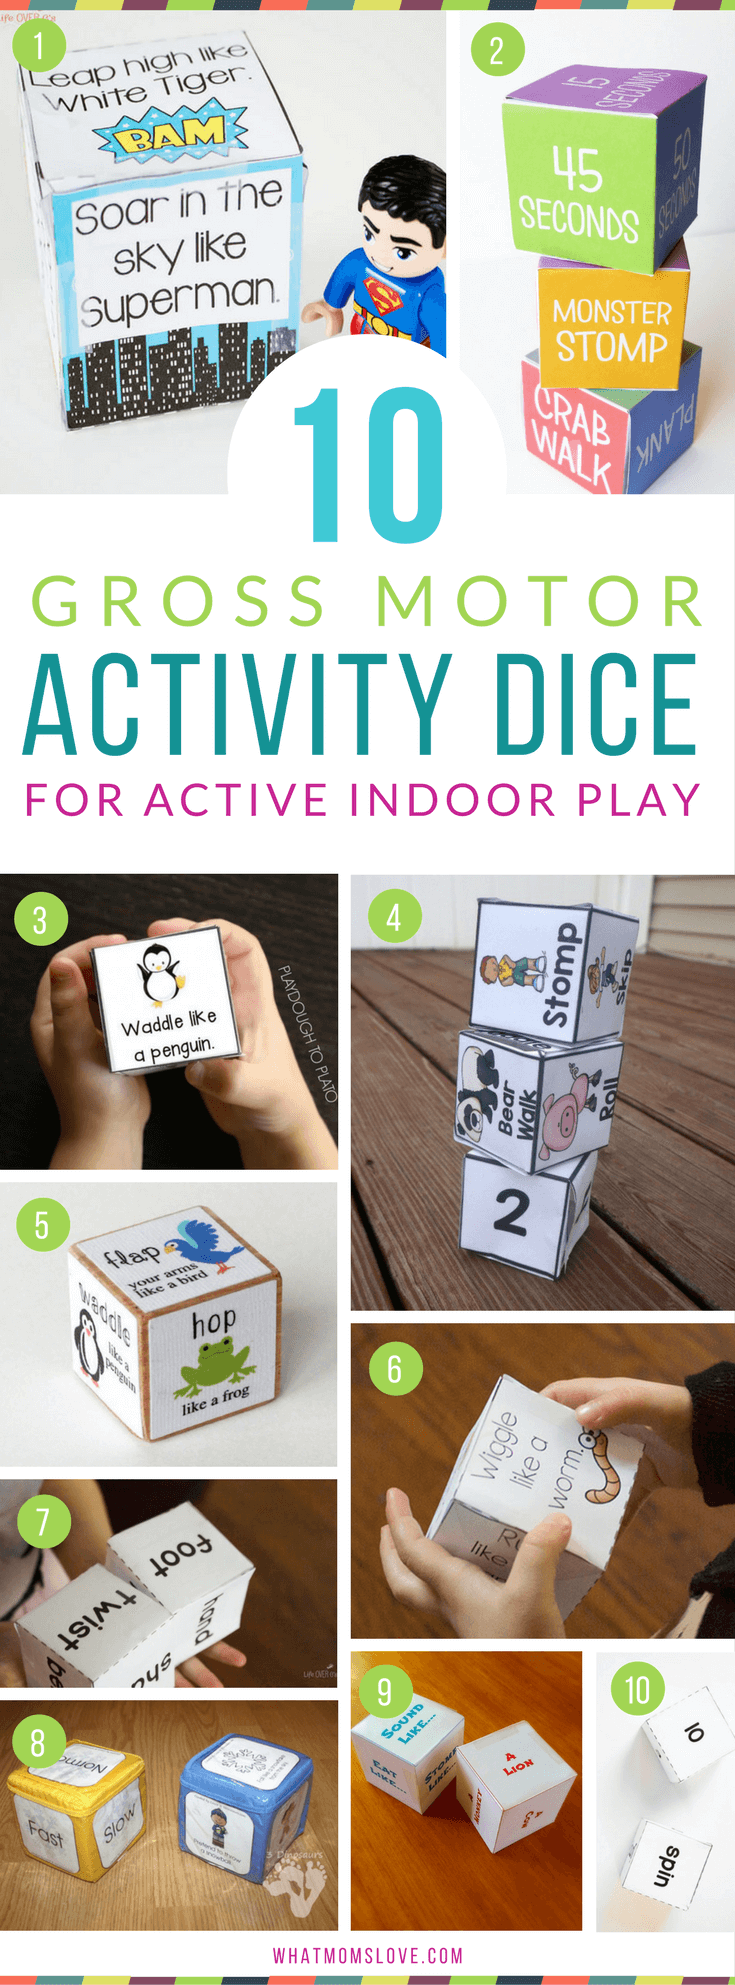 Gross Motor Activity Dice For Kids | Free Printable Movement Dice perfect for Brain Breaks, Boredom Busters and staying active indoors | Fun and physical game to get energy out inside